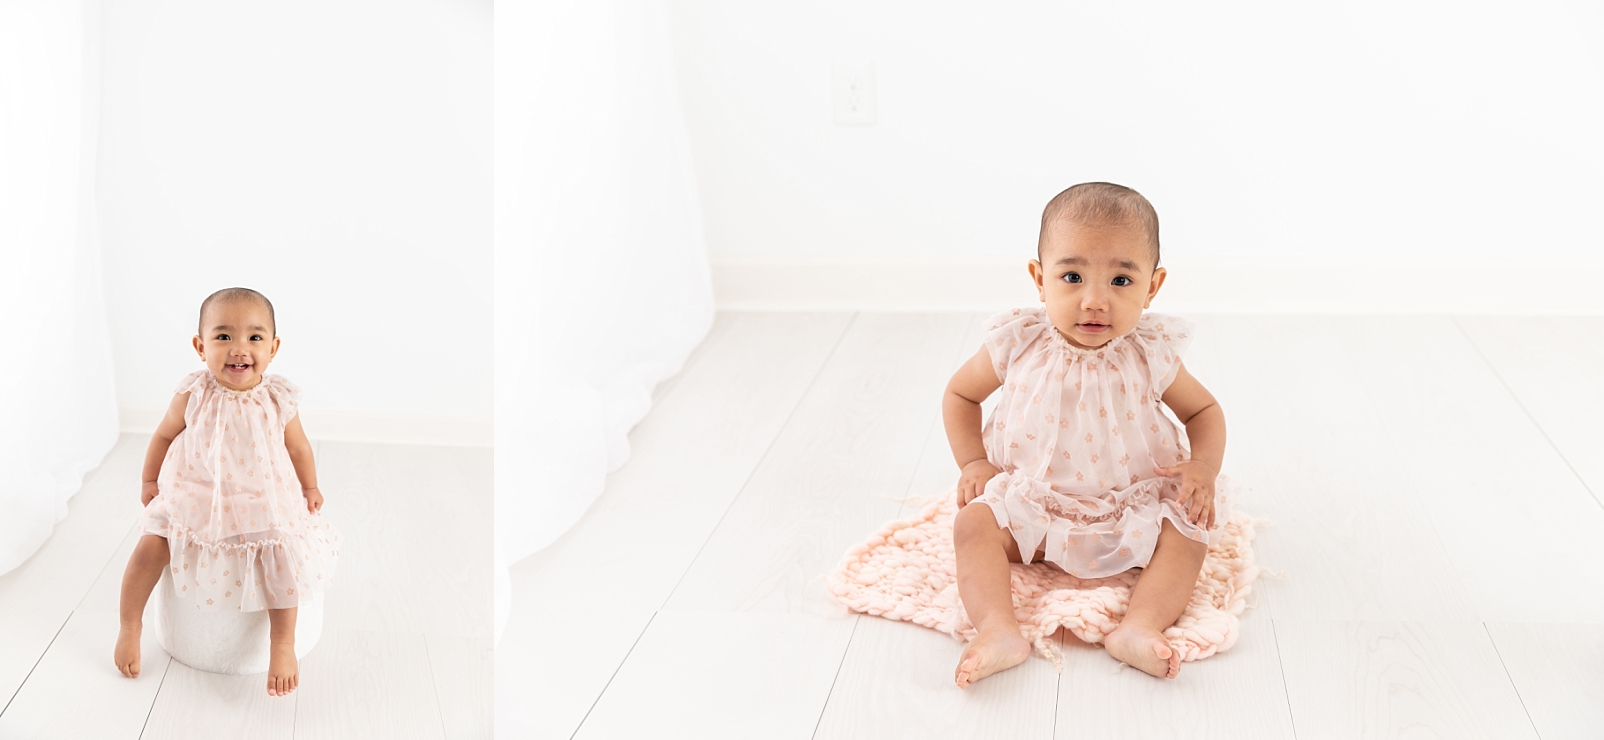 One year portraits of a girl in a pink patterned dress sitting on a white fabric stool and then on a knit blanket taken during the first year membership